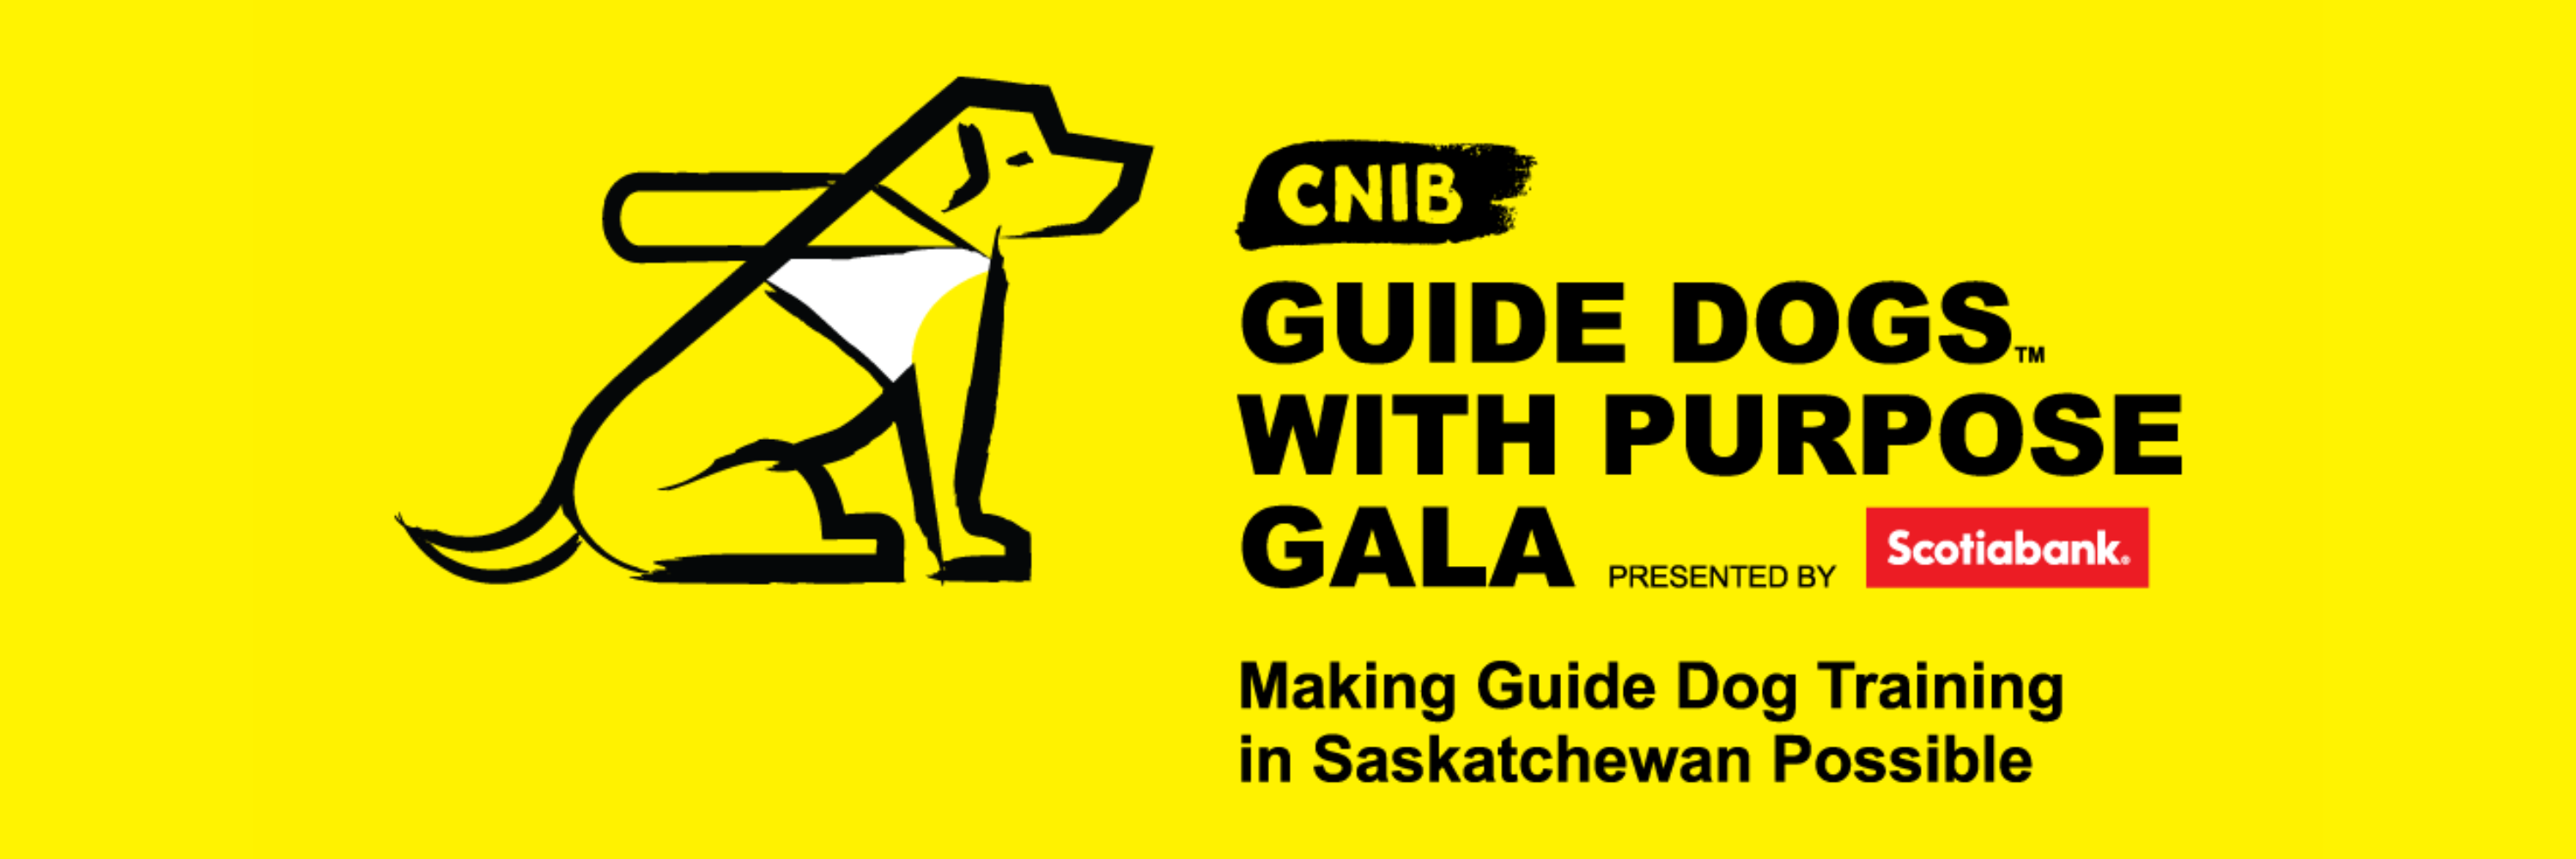 Logo–CNIB Guide Dogs with Purpose Gala presented by Scotiabank. 